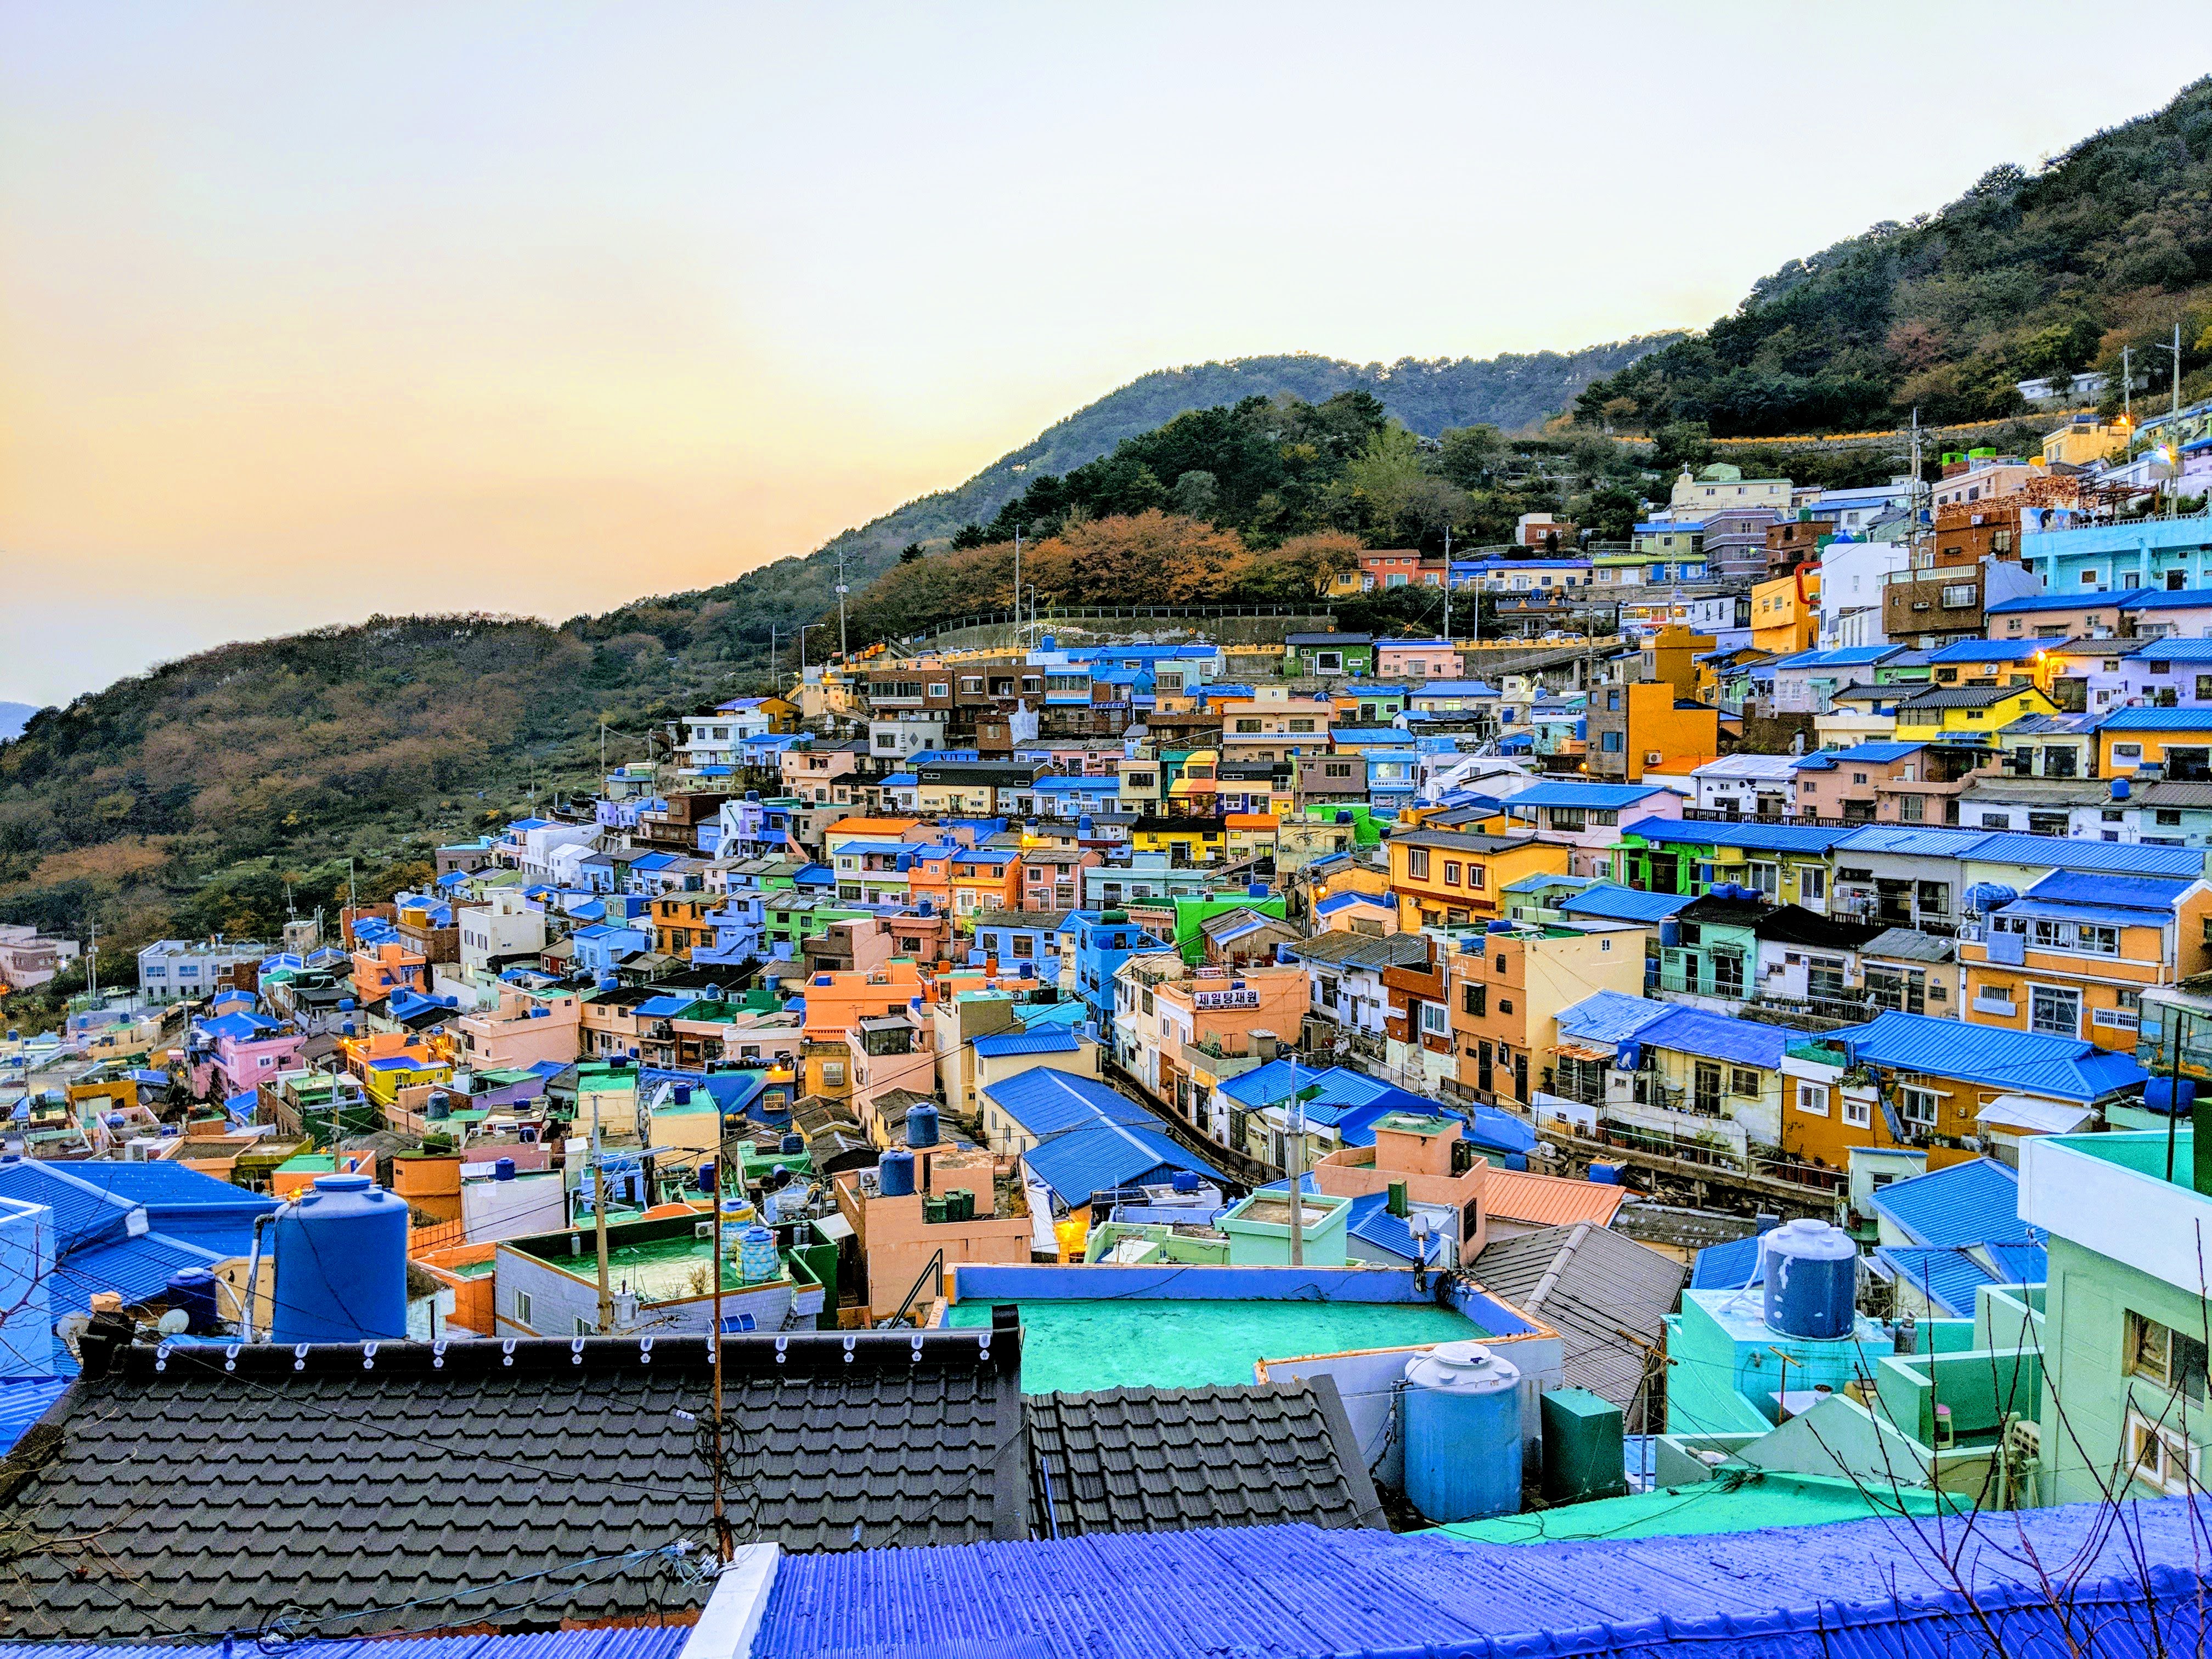 Picture of a place: Gamcheon Culture Village, Busan